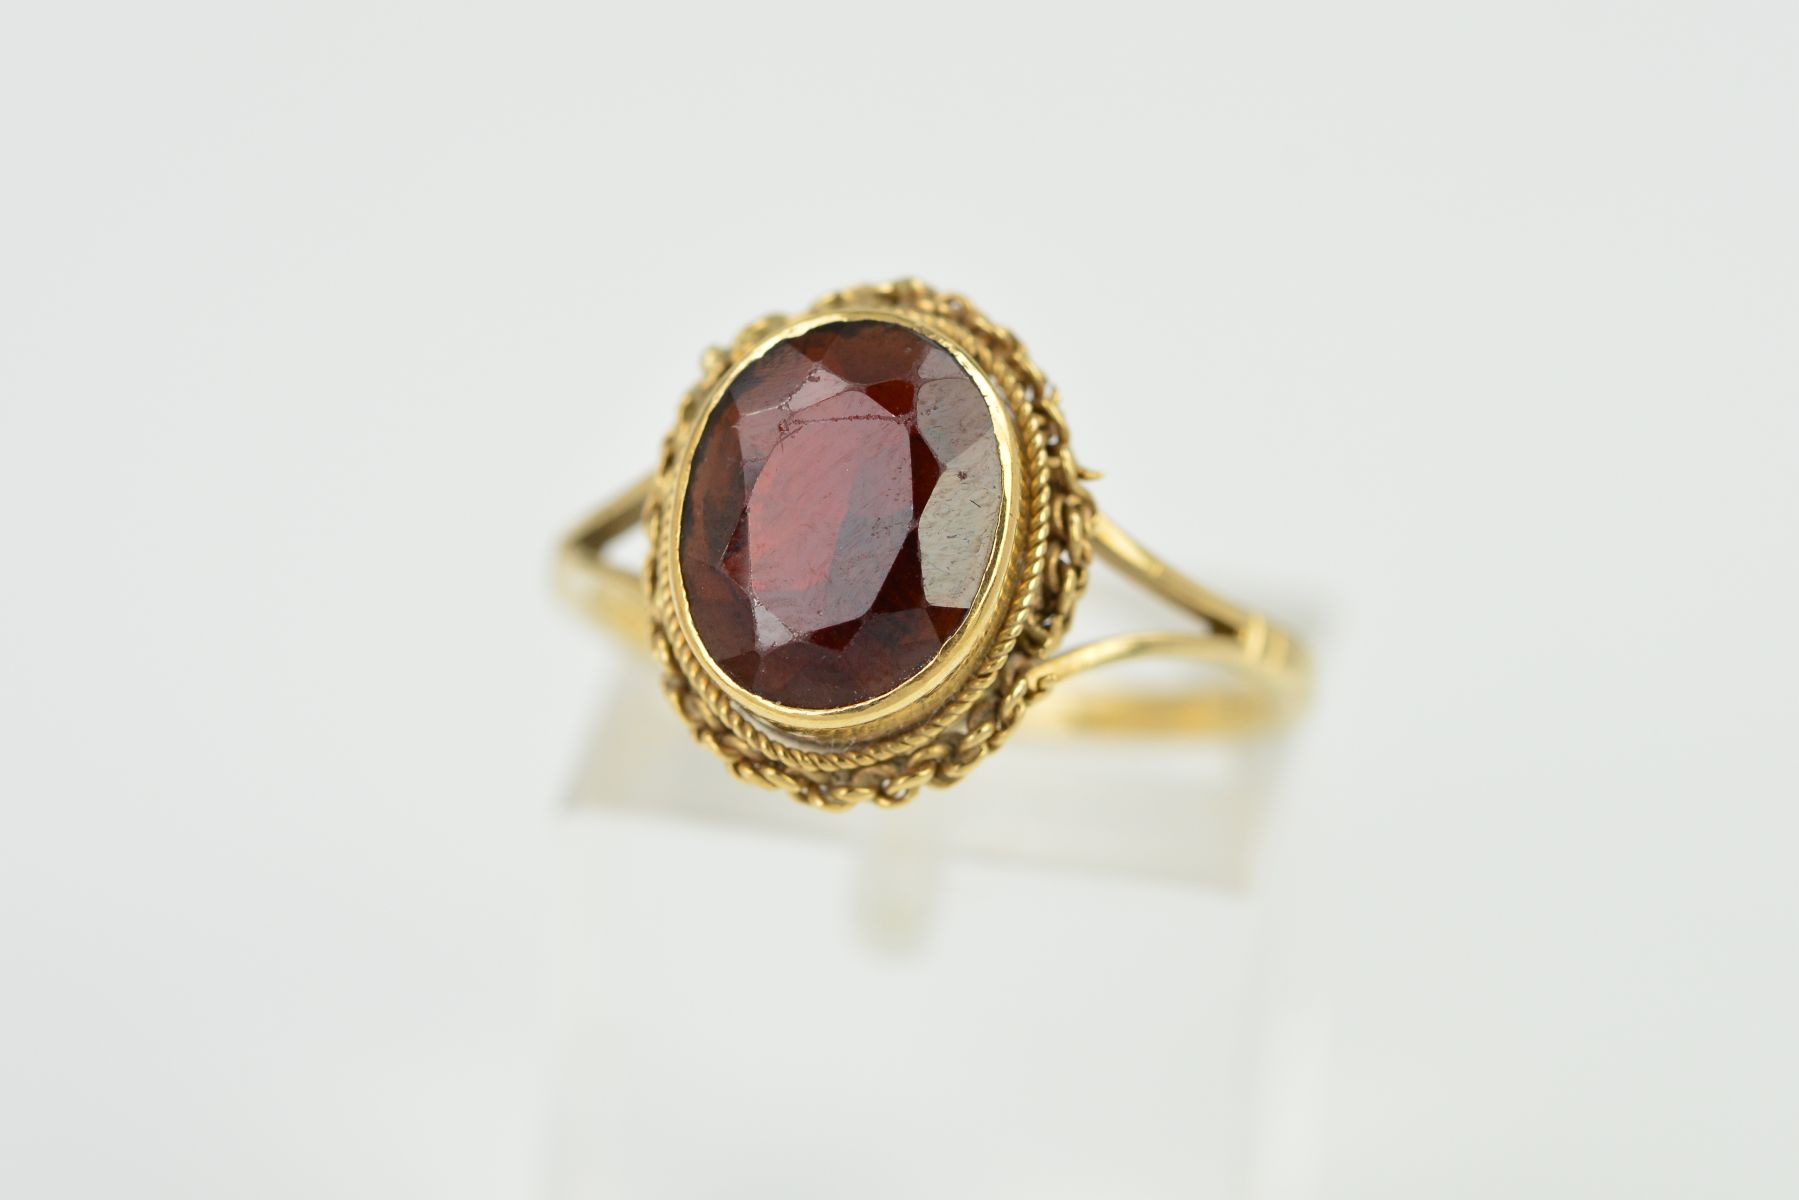 A 9CT GOLD GARNET RING, designed as an oval garnet within a collet setting within a rope twist and